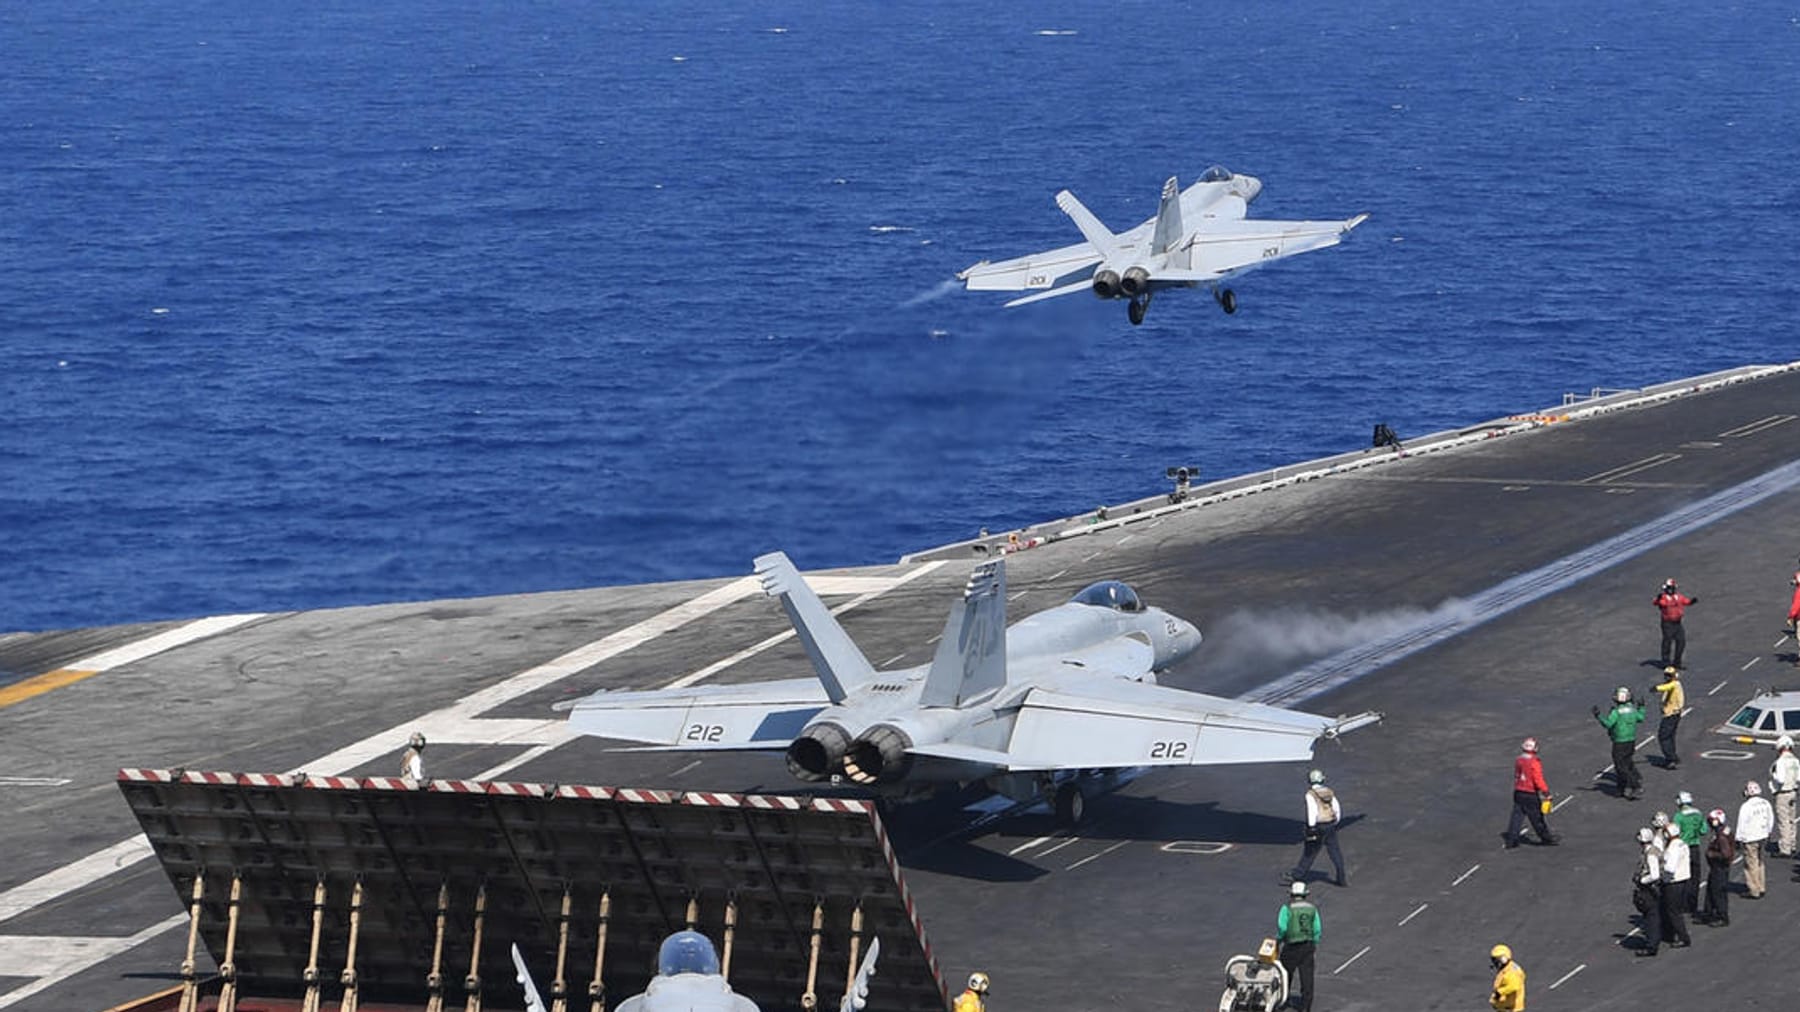 News of the attack on Israel – the United States of America sends a second aircraft carrier